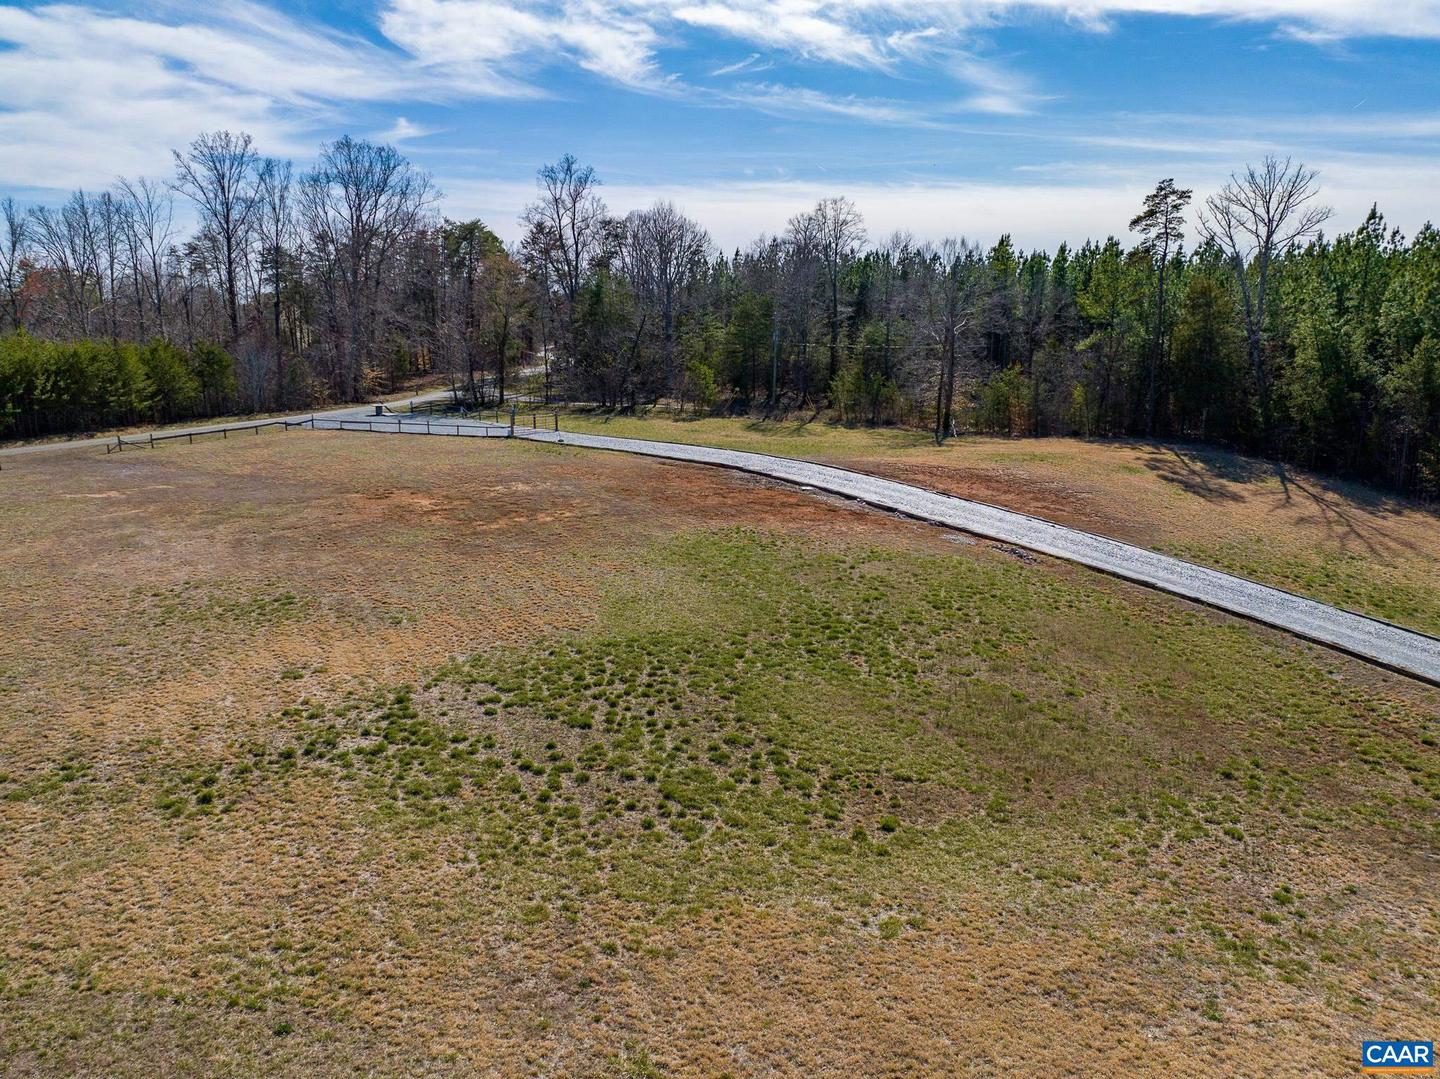 1337 STAGE JUNCTION RD, COLUMBIA, Virginia 23038, ,Land,For sale,1337 STAGE JUNCTION RD,639723 MLS # 639723